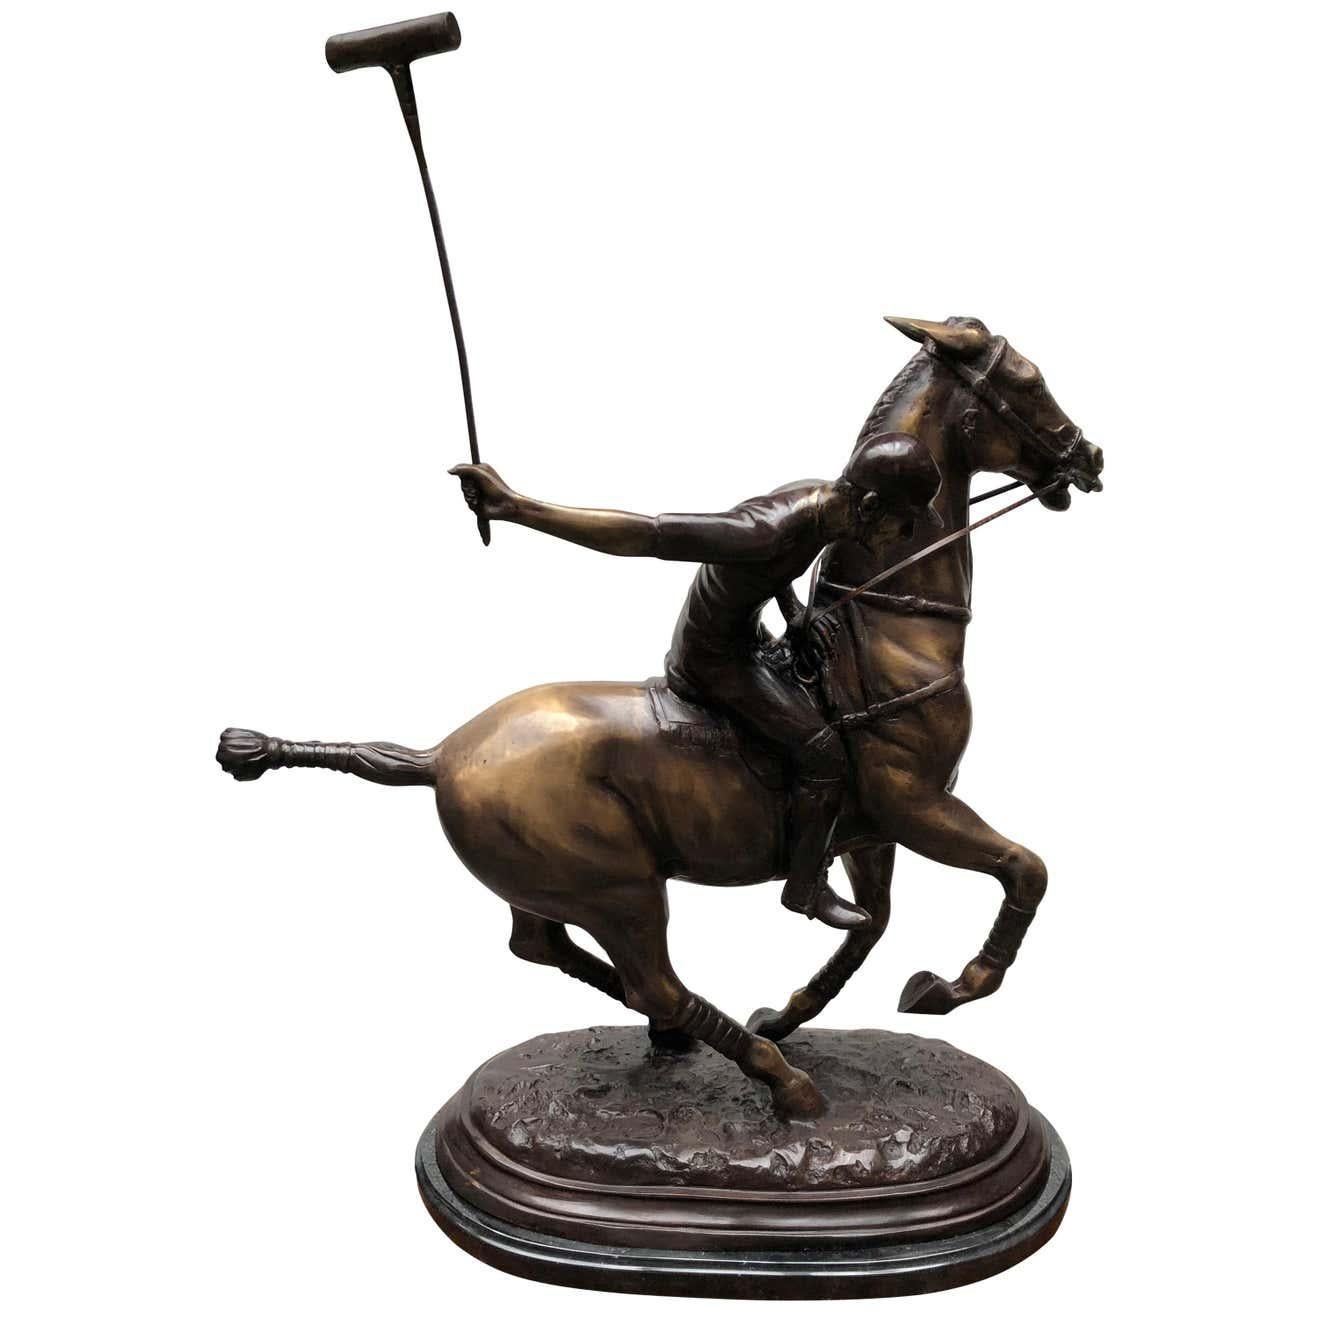 A stunning English bronze casting of a polo player in full swing. Artist has really captured the energy and athleticism of the scene with great skill. Patina to the bronze is superb with various brown hues. Piece sits on a black marble base which is